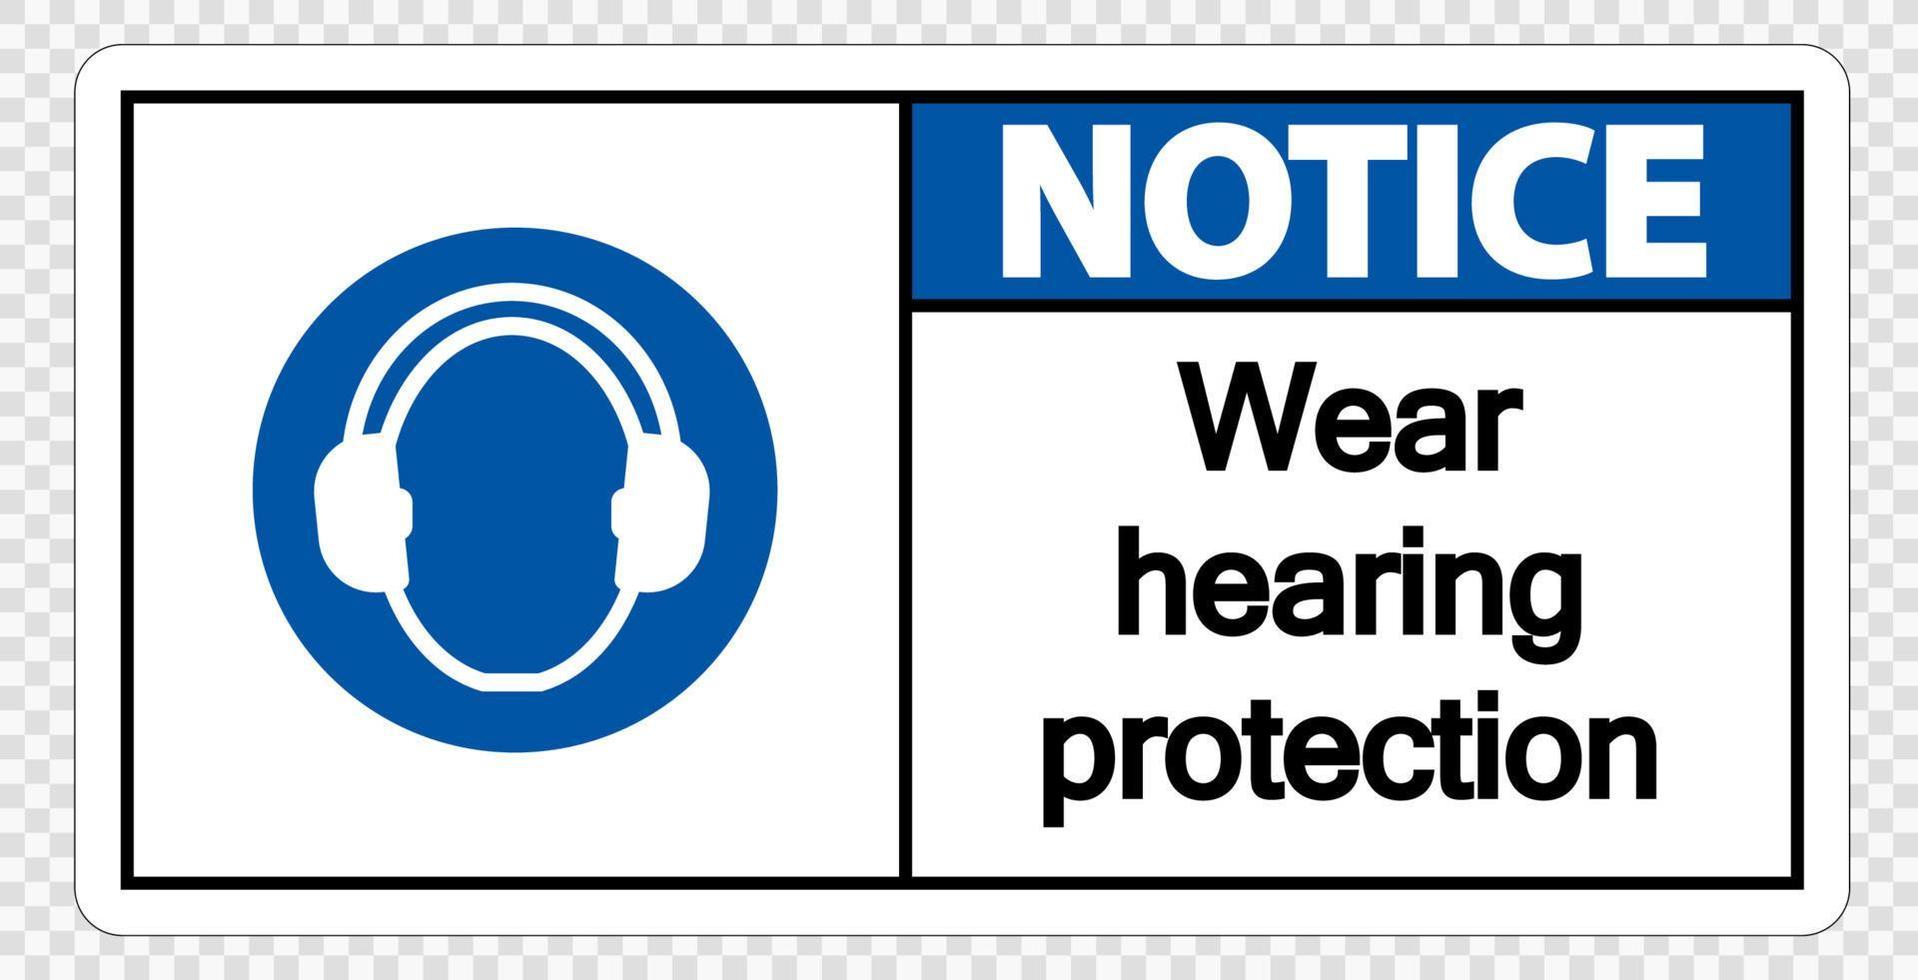 Notice Wear hearing protection on transparent background vector